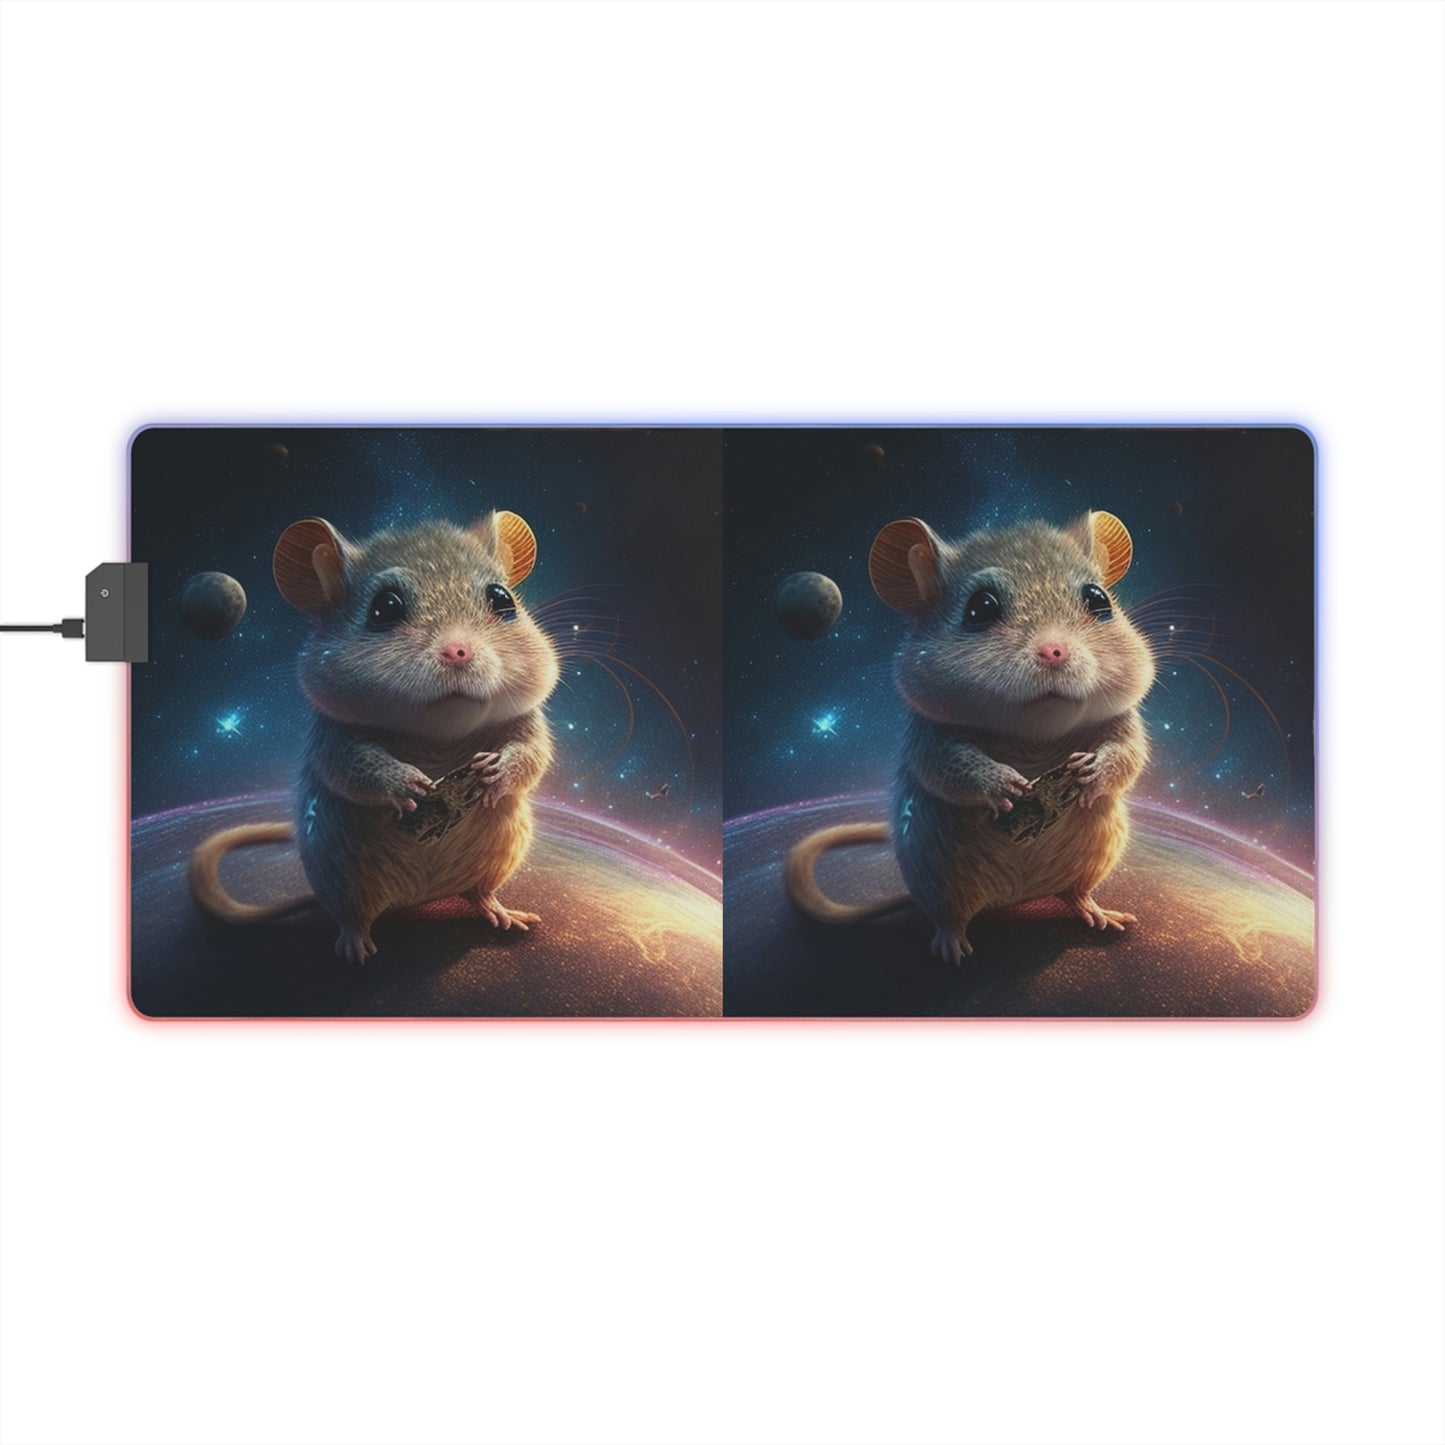 LED Gaming Mouse Pad Mouse On The Moon 3